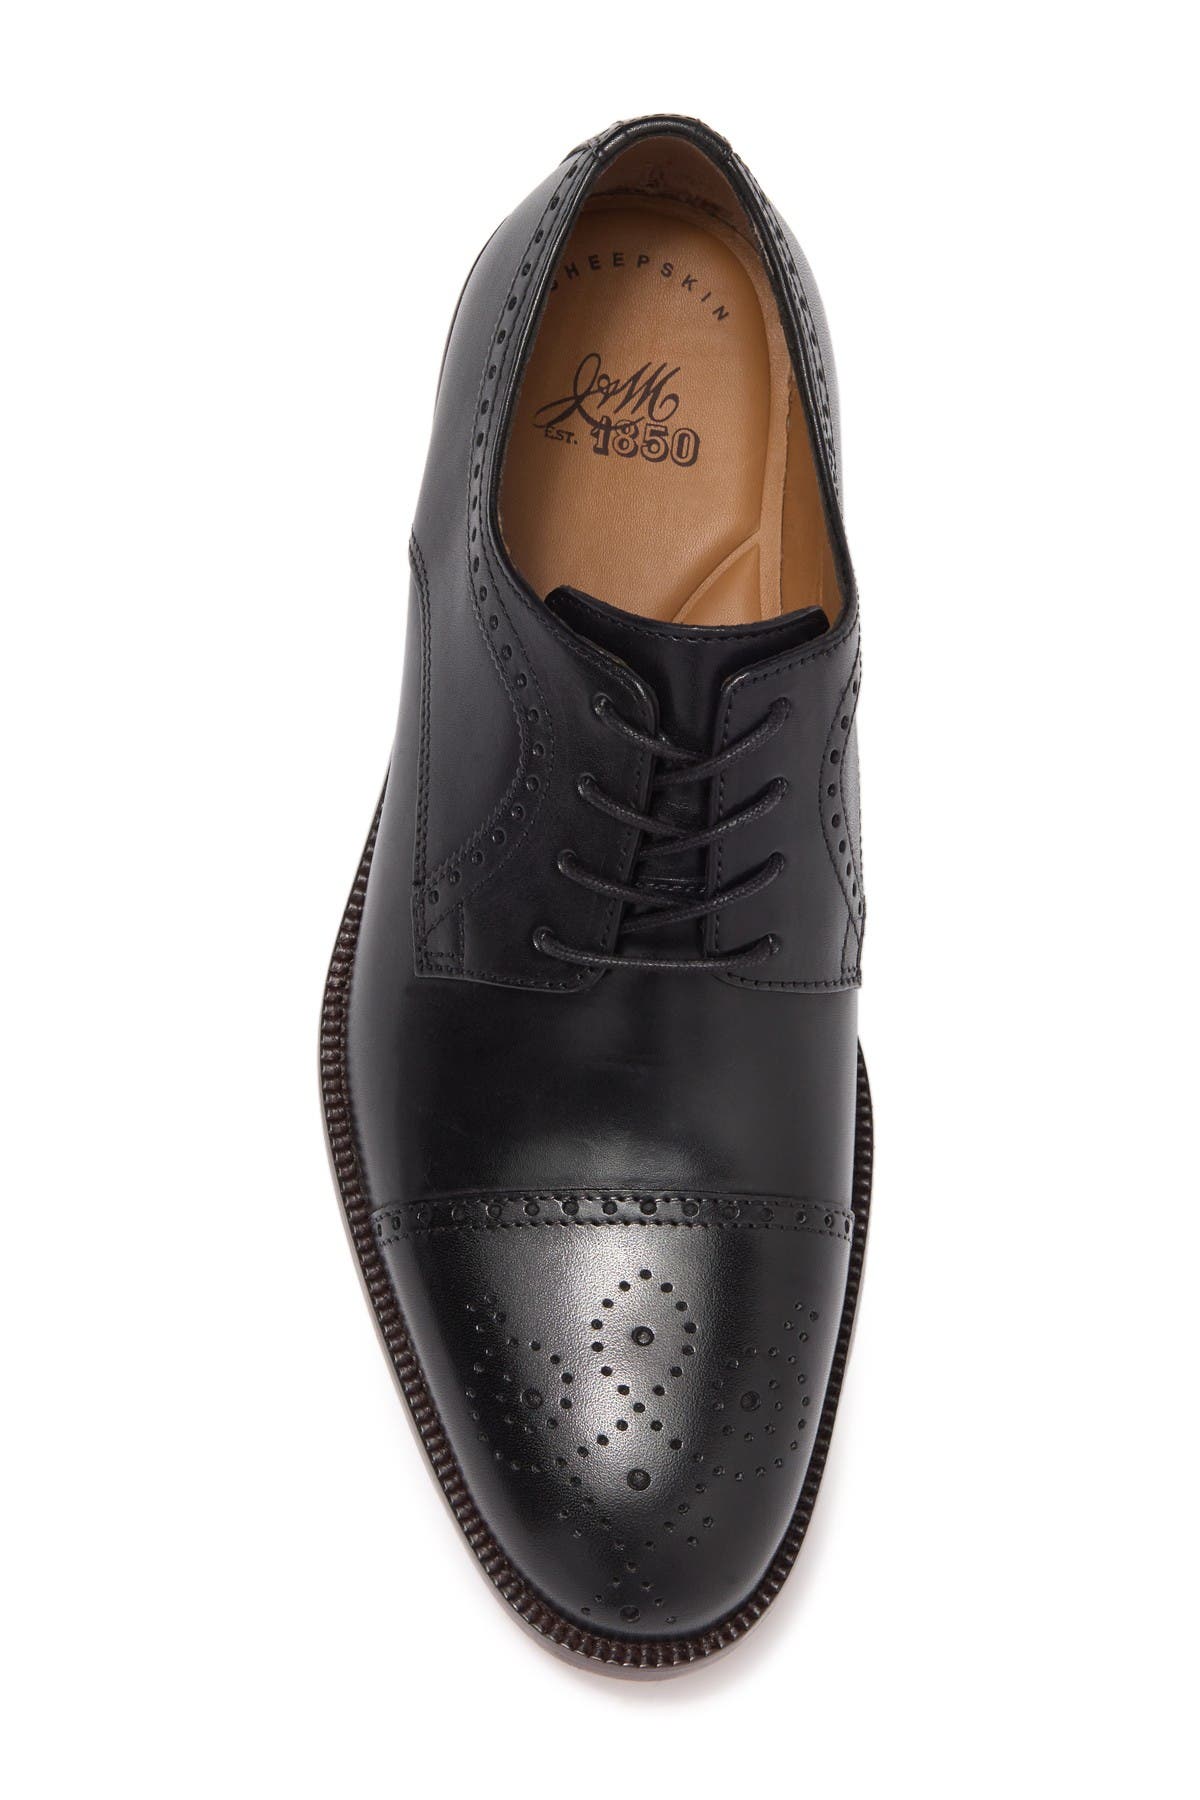 johnston and murphy derby shoes